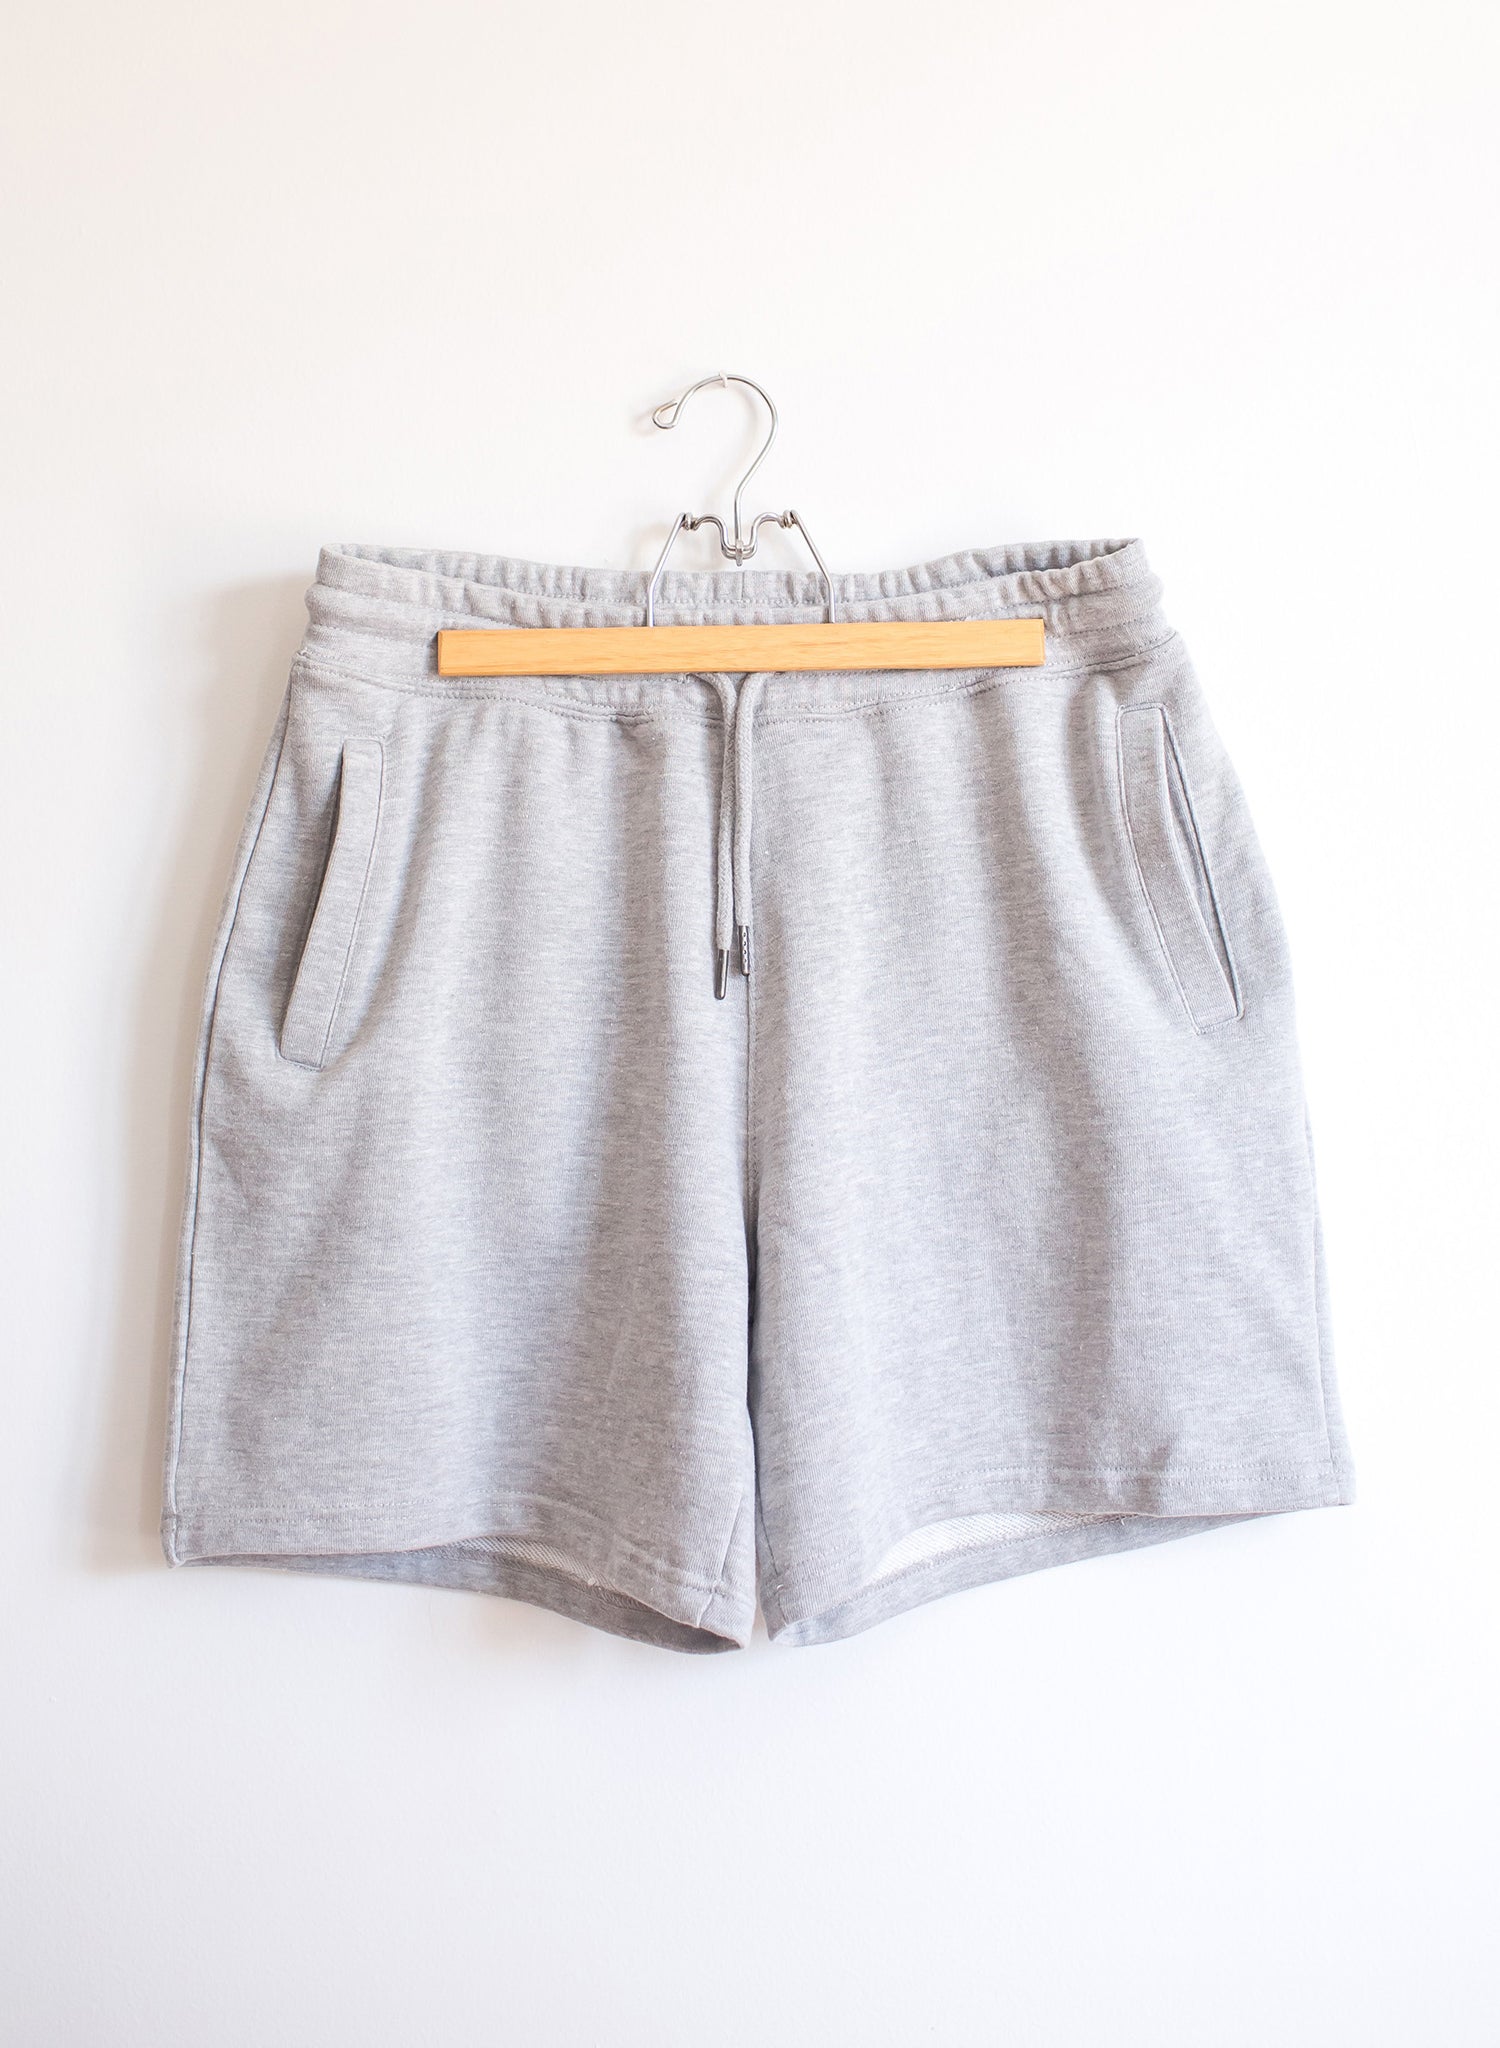 Hanging pair of heather grey cotton sweatshorts with drawstring and pockets at side